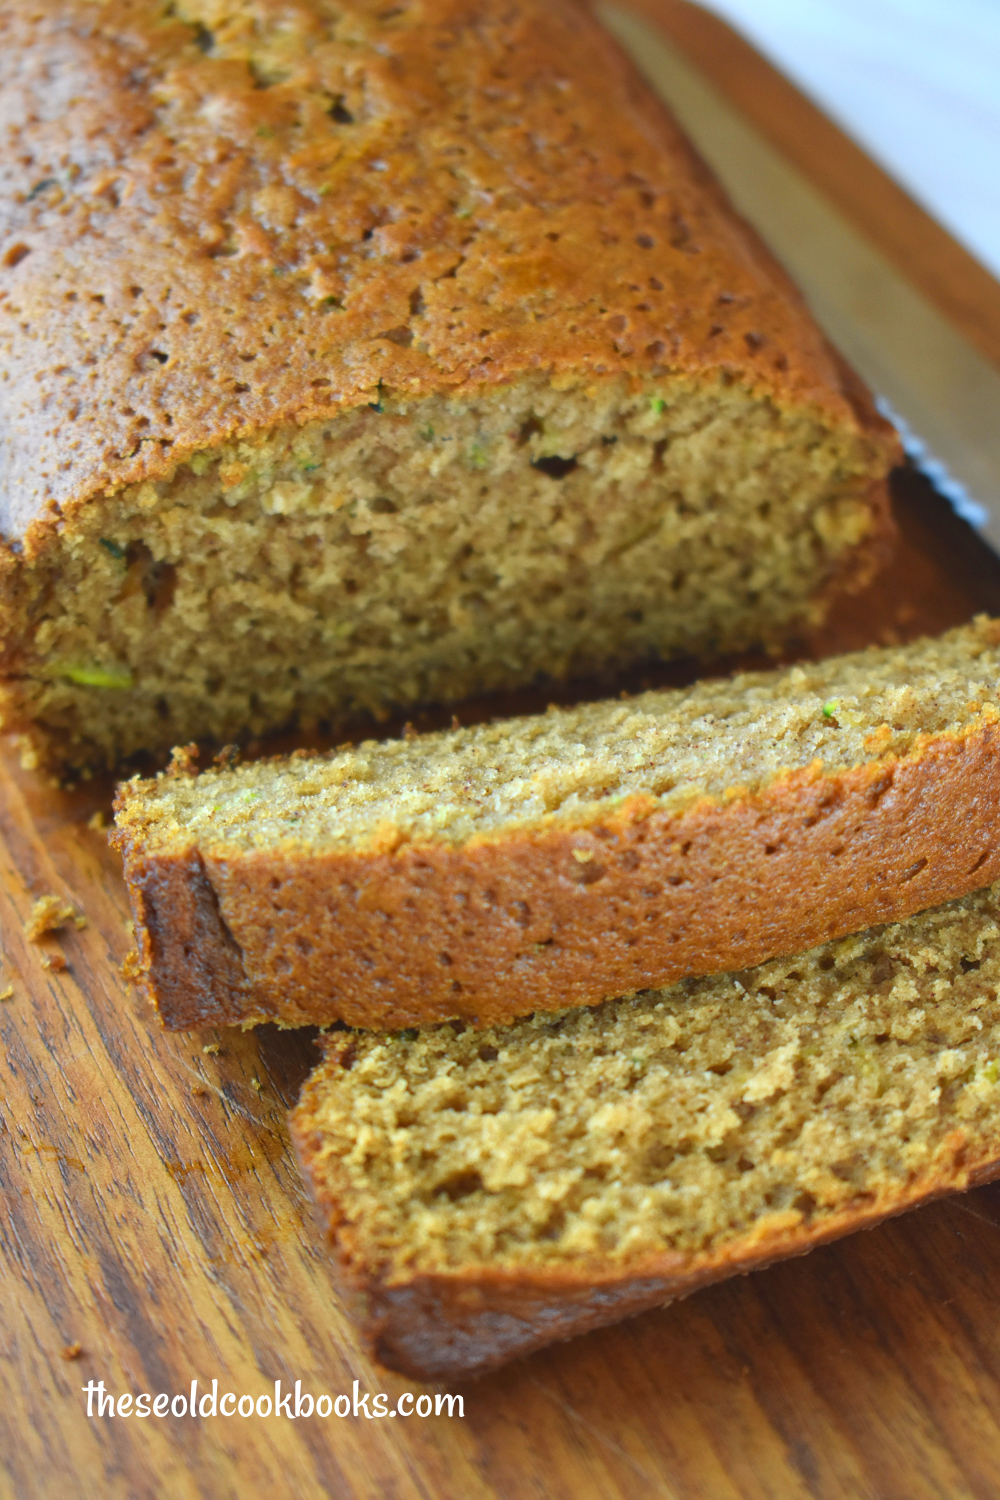 Classic Zucchini Bread – A Classic Recipe With Step By Step Instructions